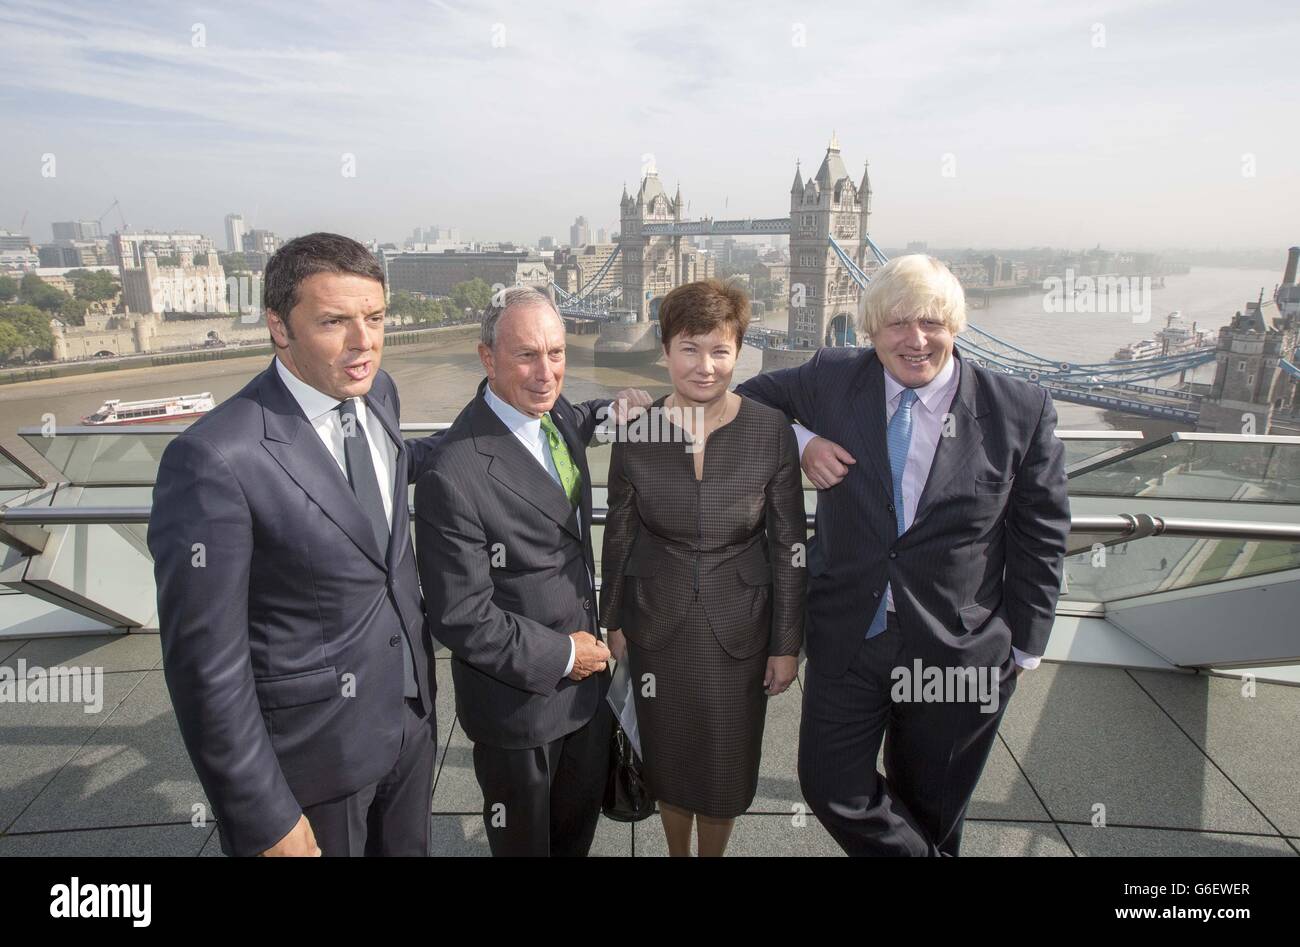 (left to right) Matteo Renzi the Mayor of Florence, Michael Bloomberg the Mayor of New York , Hanna Gronkiewicz-Waltz the mayor of Warsaw and Boris Johnson the Mayor of London, at the launch of the Mayors Challenge in Europe at City Hall in London. Stock Photo